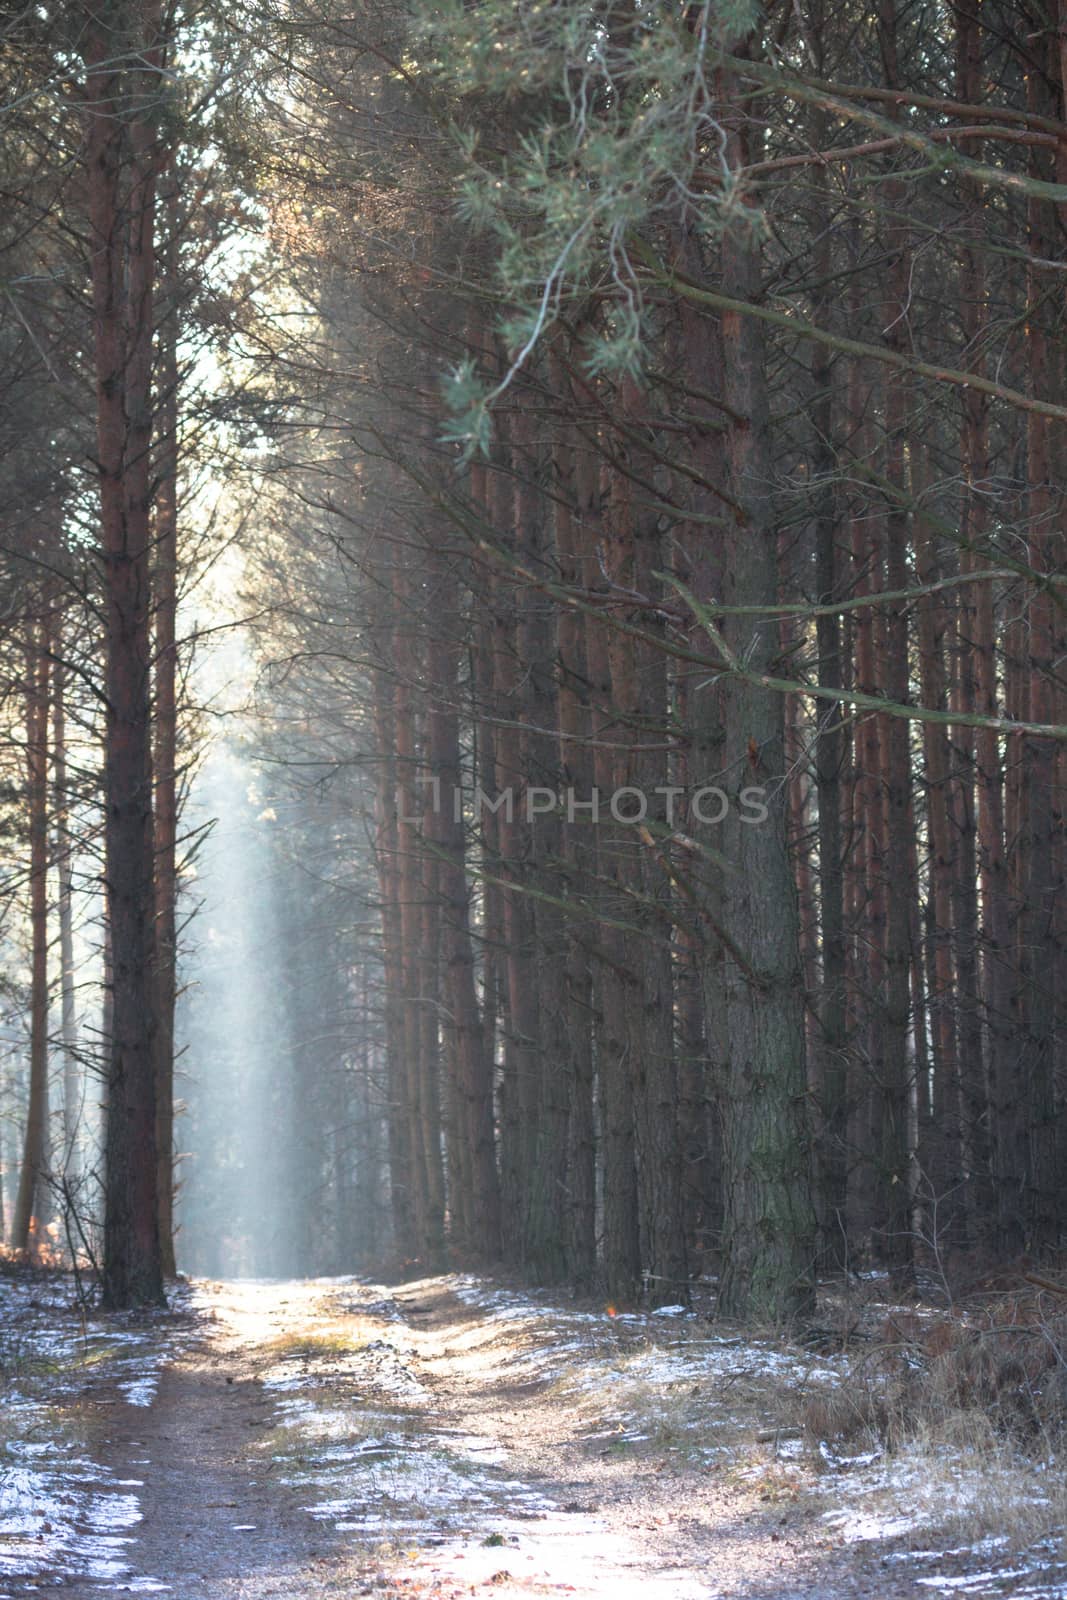 sunlight in the green forest, nature series